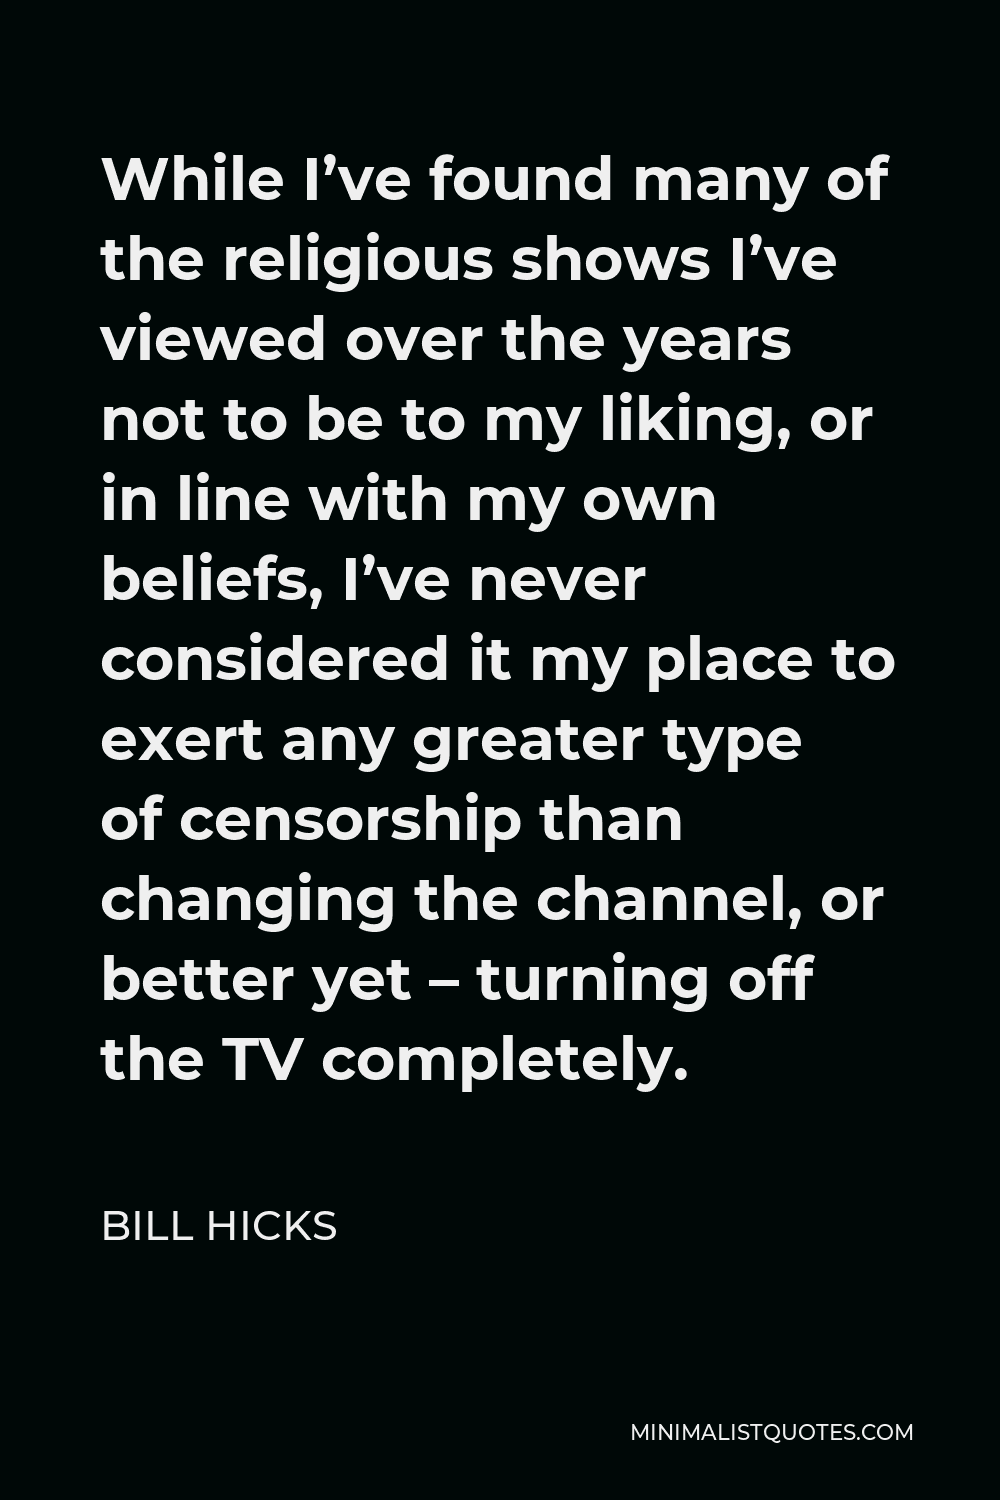 Bill Hicks Quote - While I’ve found many of the religious shows I’ve viewed over the years not to be to my liking, or in line with my own beliefs, I’ve never considered it my place to exert any greater type of censorship than changing the channel, or better yet – turning off the TV completely.